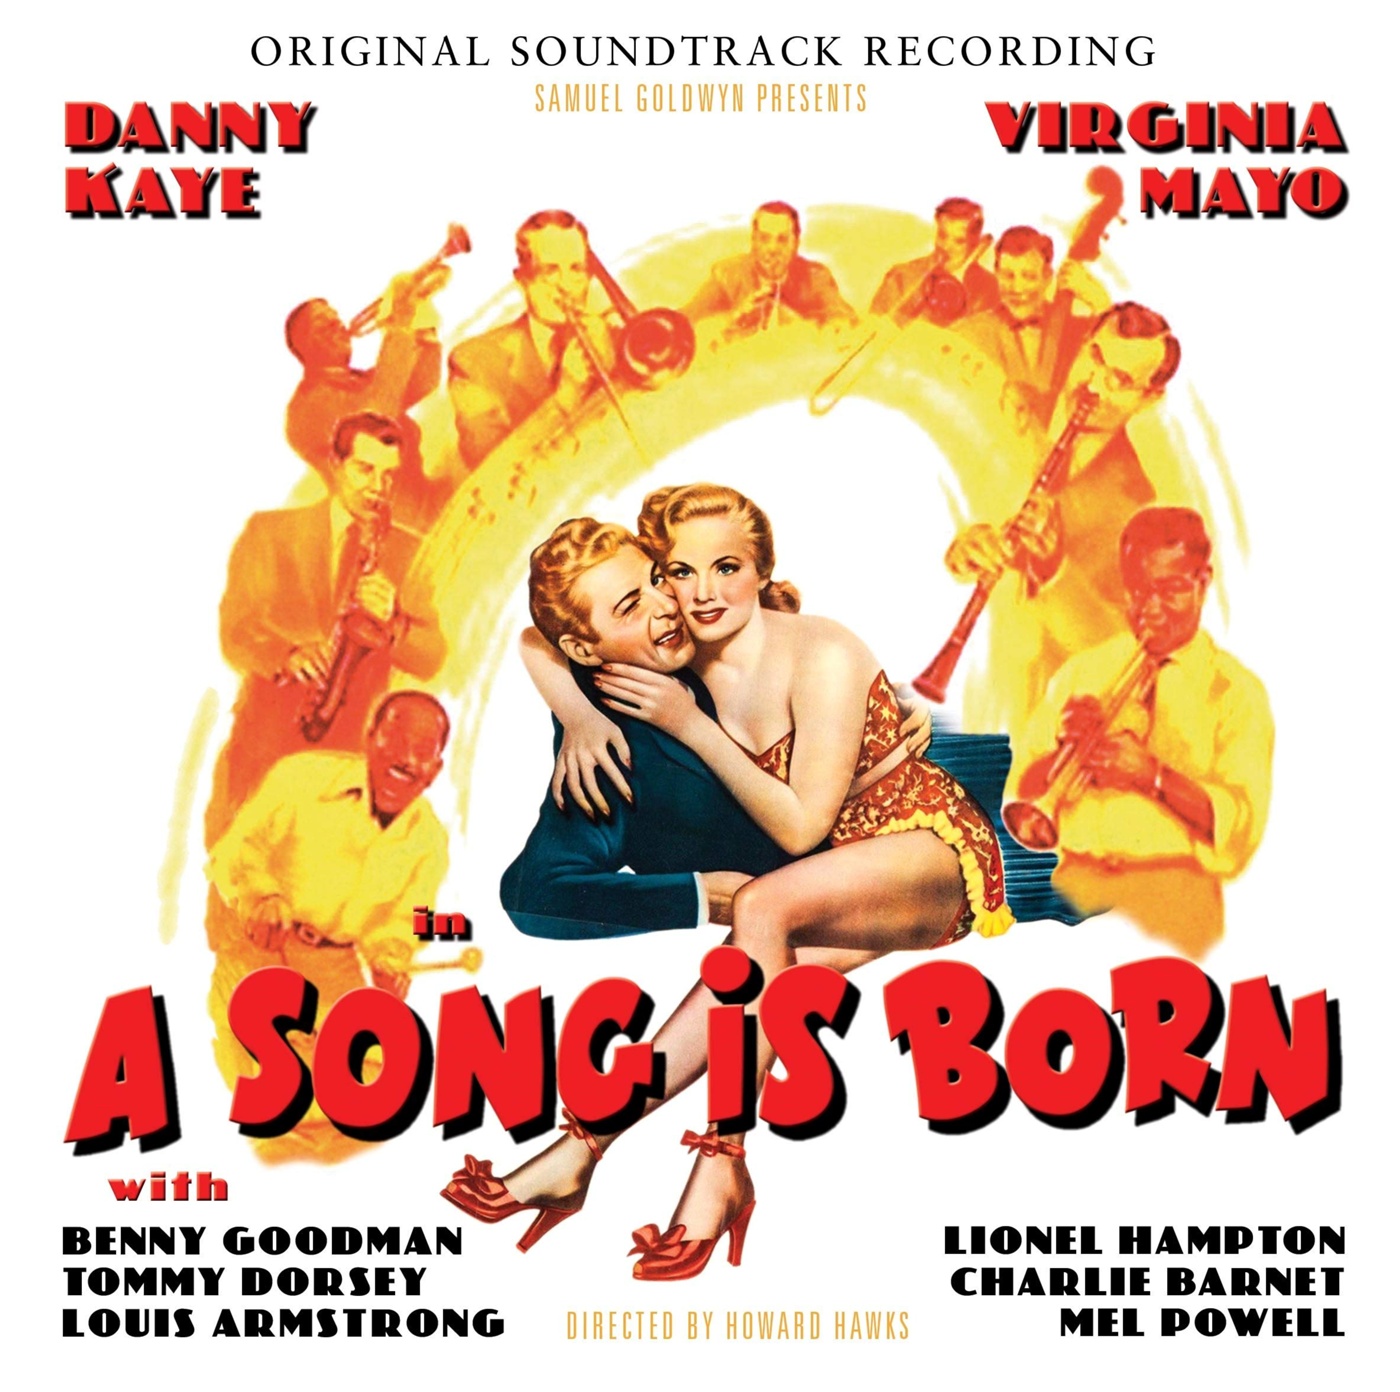 Born soundtrack. A Song is born.